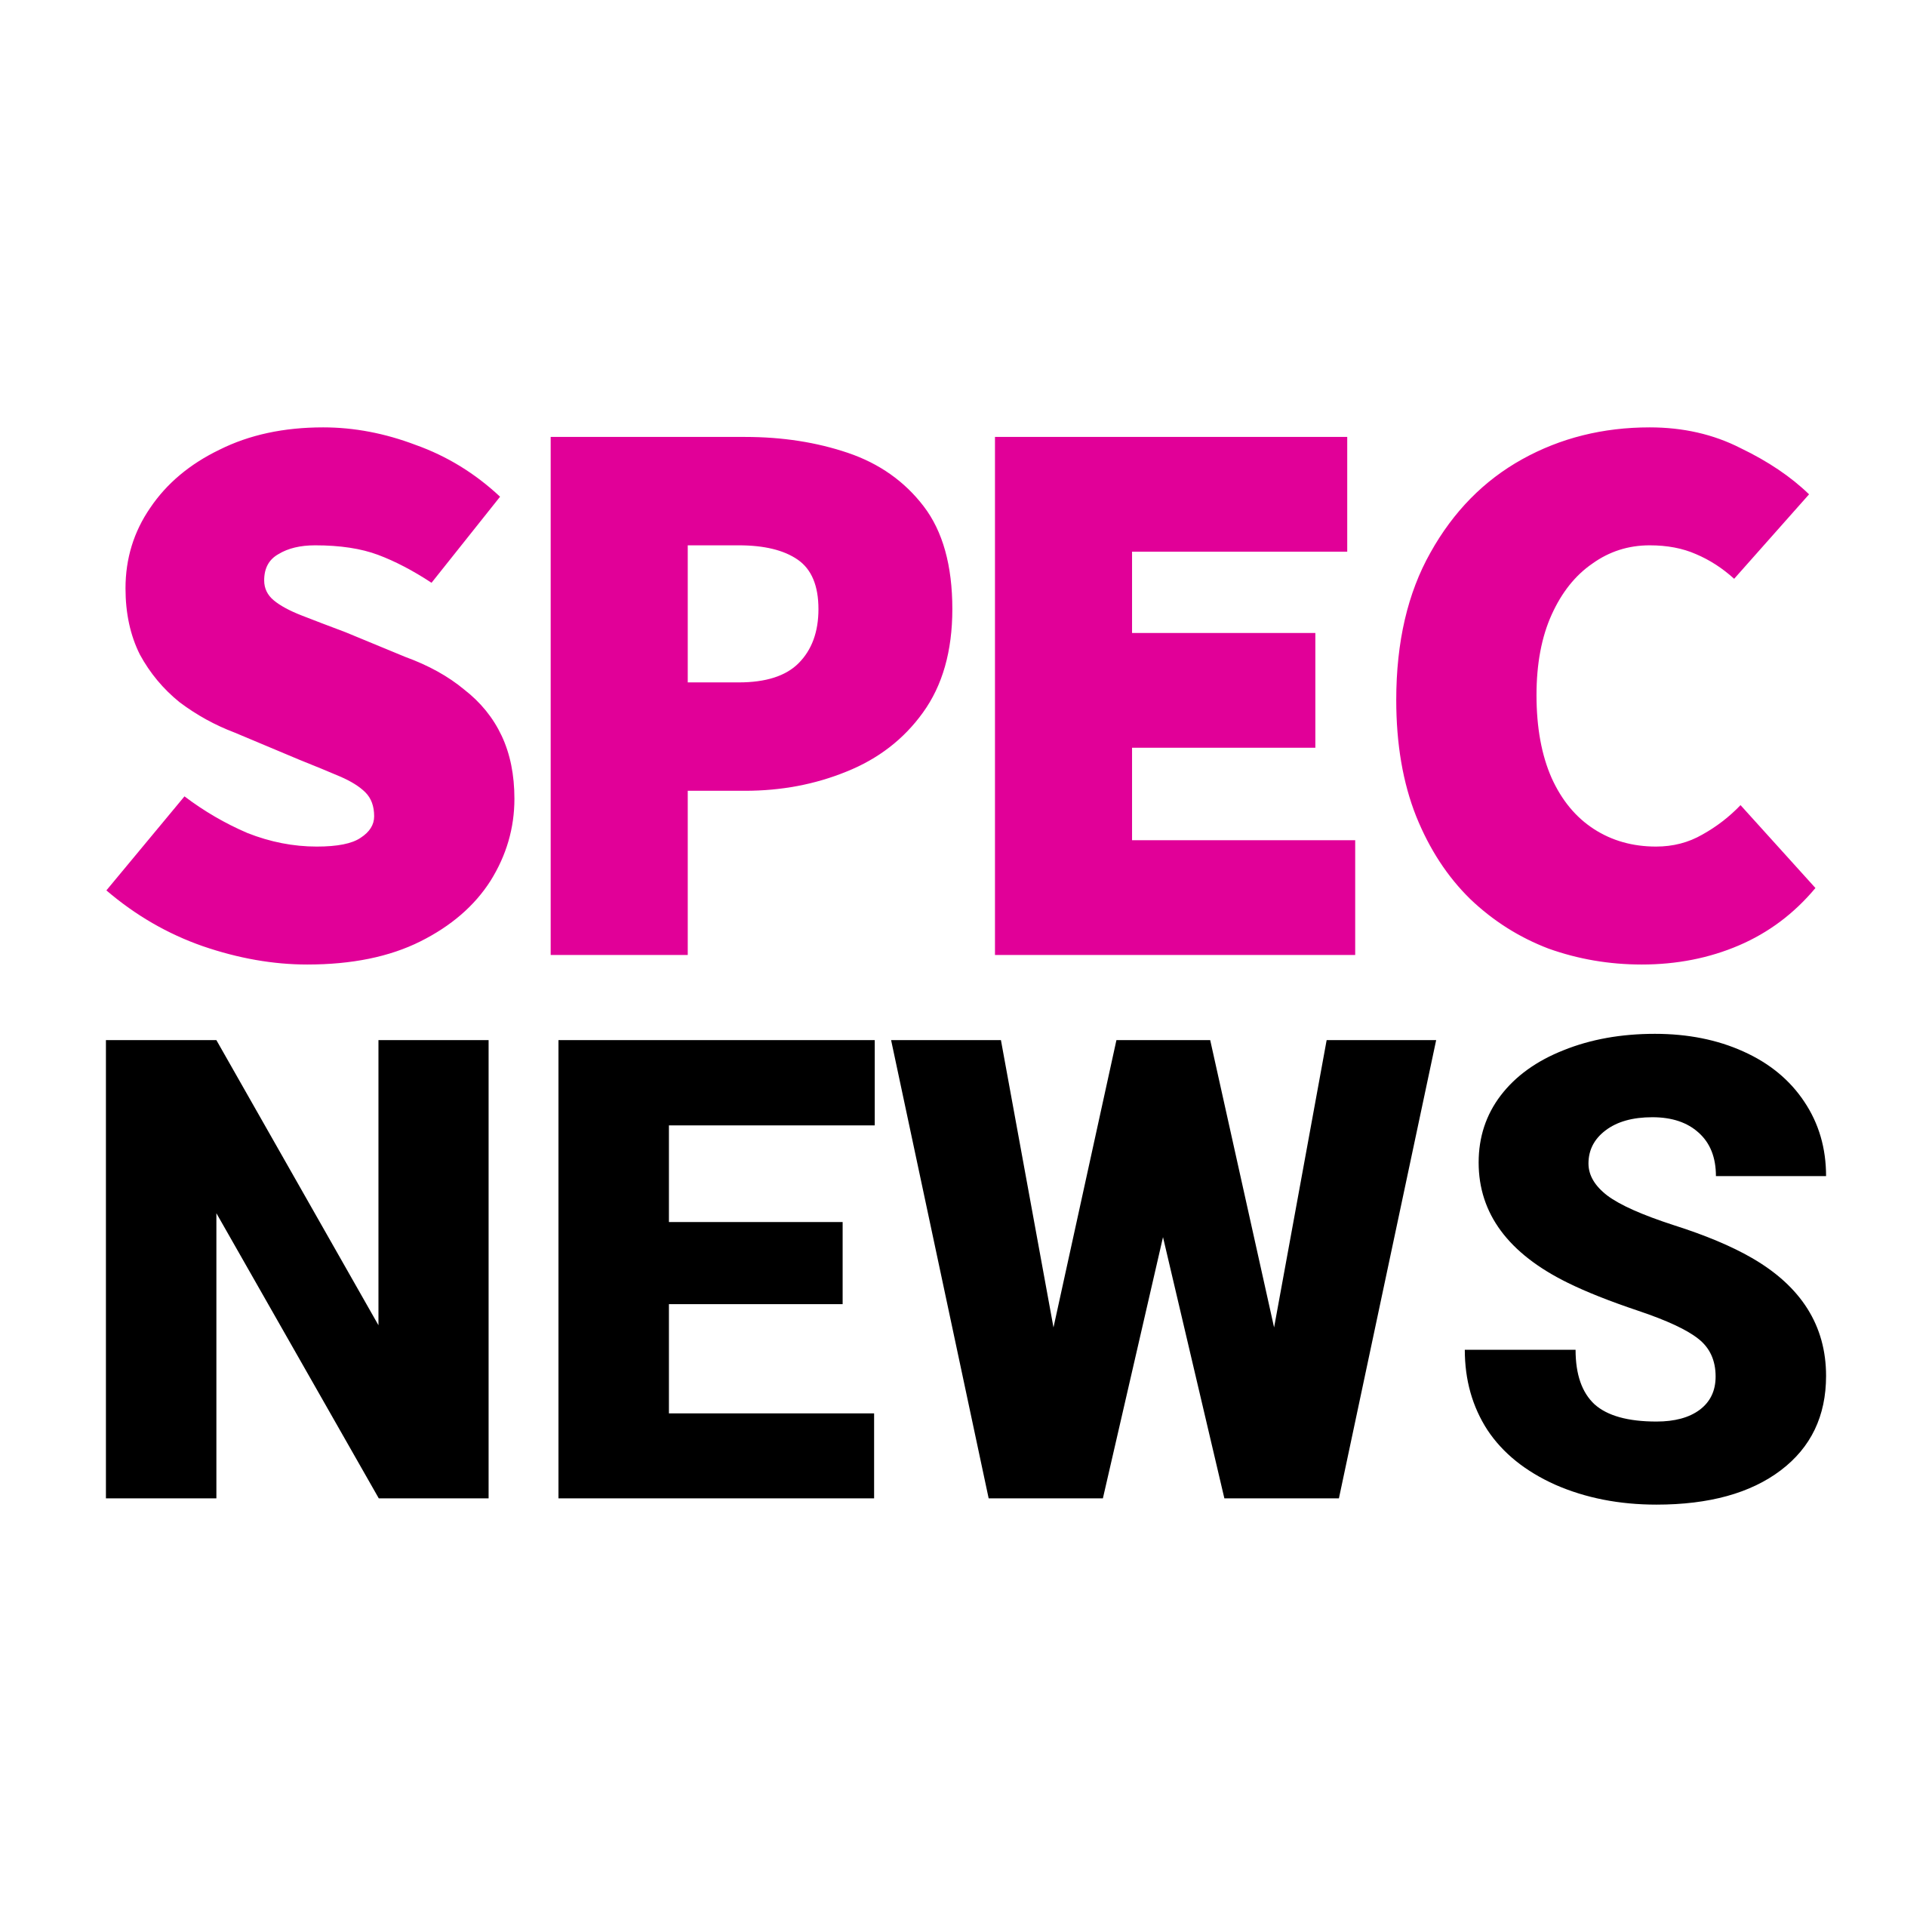 SpecNews logo - The word Spec in pink and the word News in black